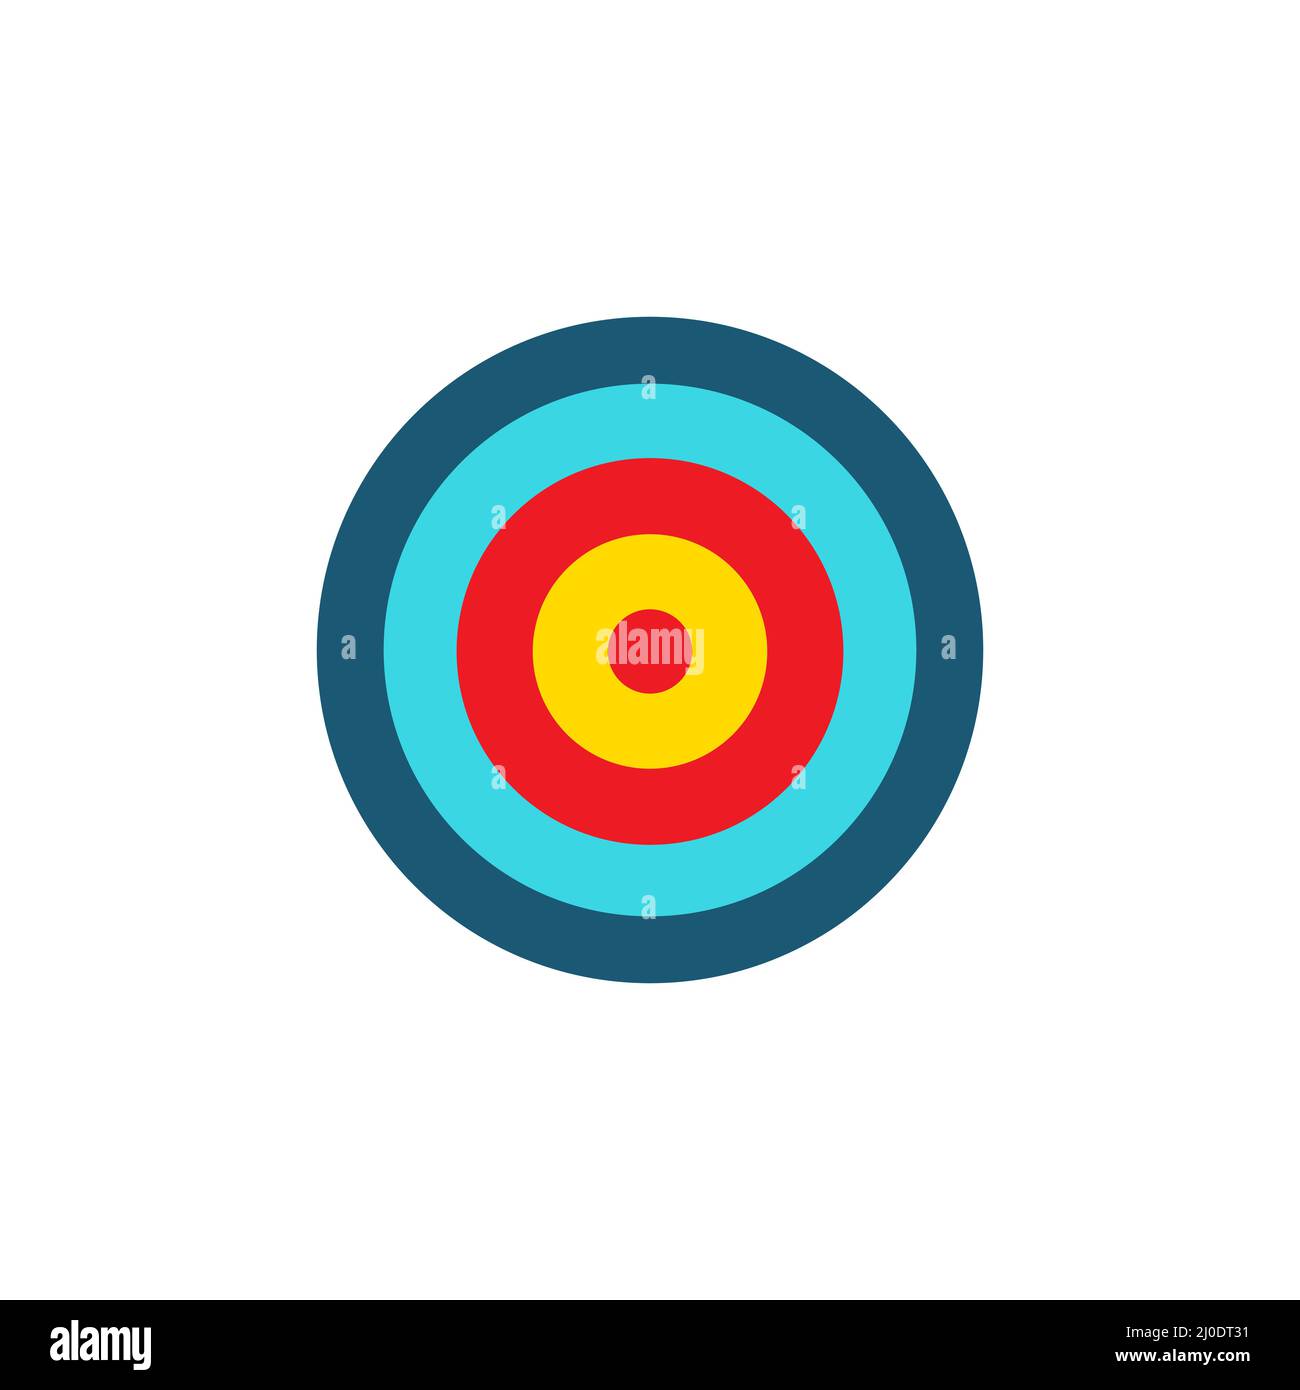 Target colorful icon. Goal symbol with bow arrow. Darts game element. Marketing or business aim. Stock Vector